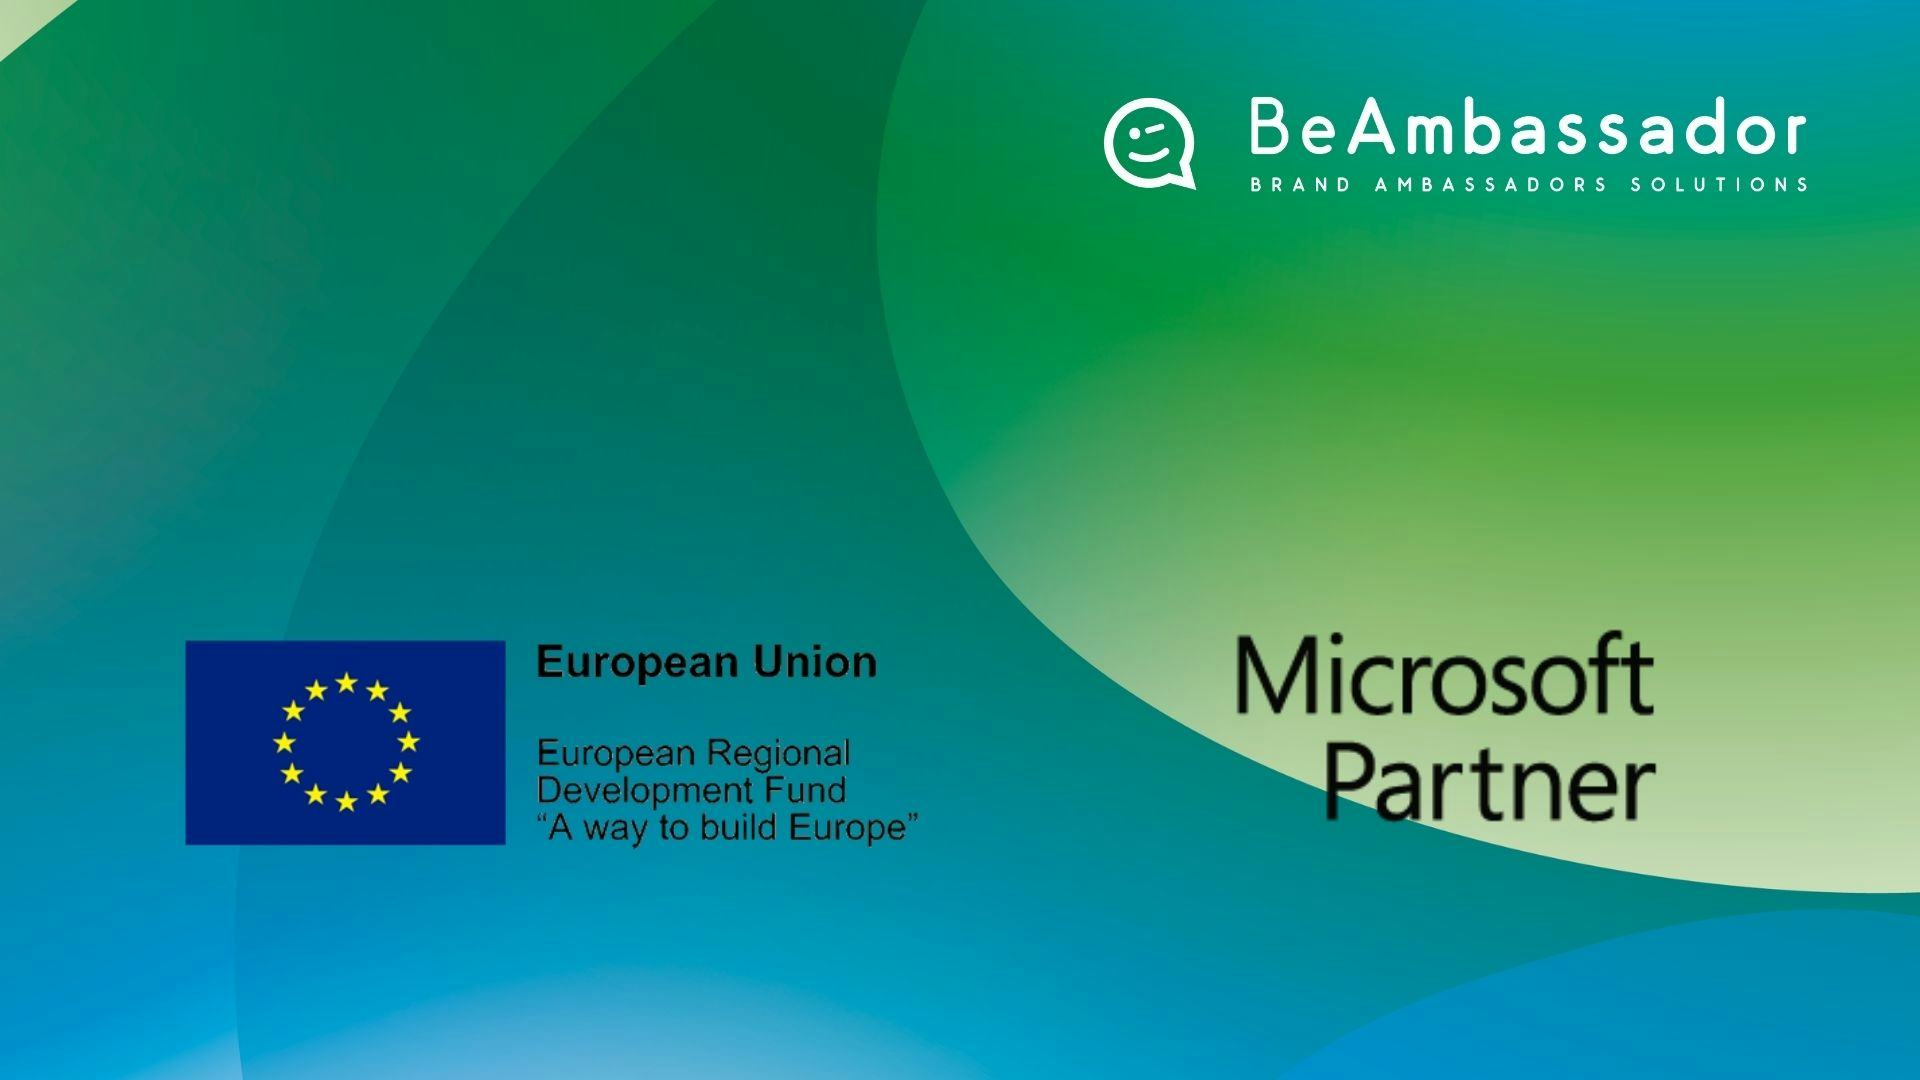 BeAmbassador Software - BlogsterApp Ambassador S.L. within the framework of the Export Initiation Program of ICEX, has had the support of ICEX and with the co-financing of the European FEDER fund.